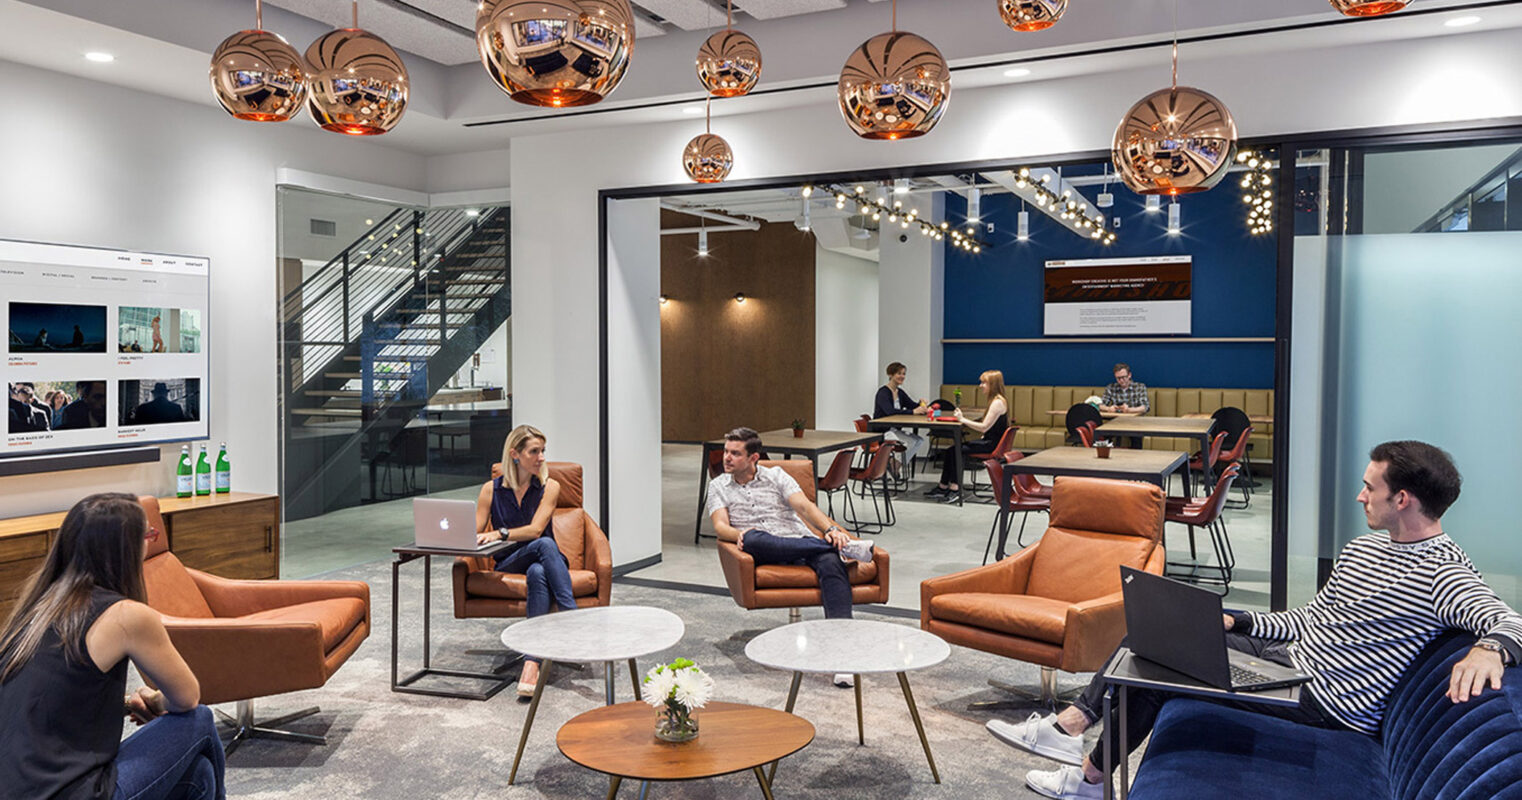 Modern open-plan office space featuring eclectic mix of traditional and contemporary furniture, copper pendant lights, and a two-tiered mezzanine for additional seating areas, fostering a vibrant collaborative atmosphere.